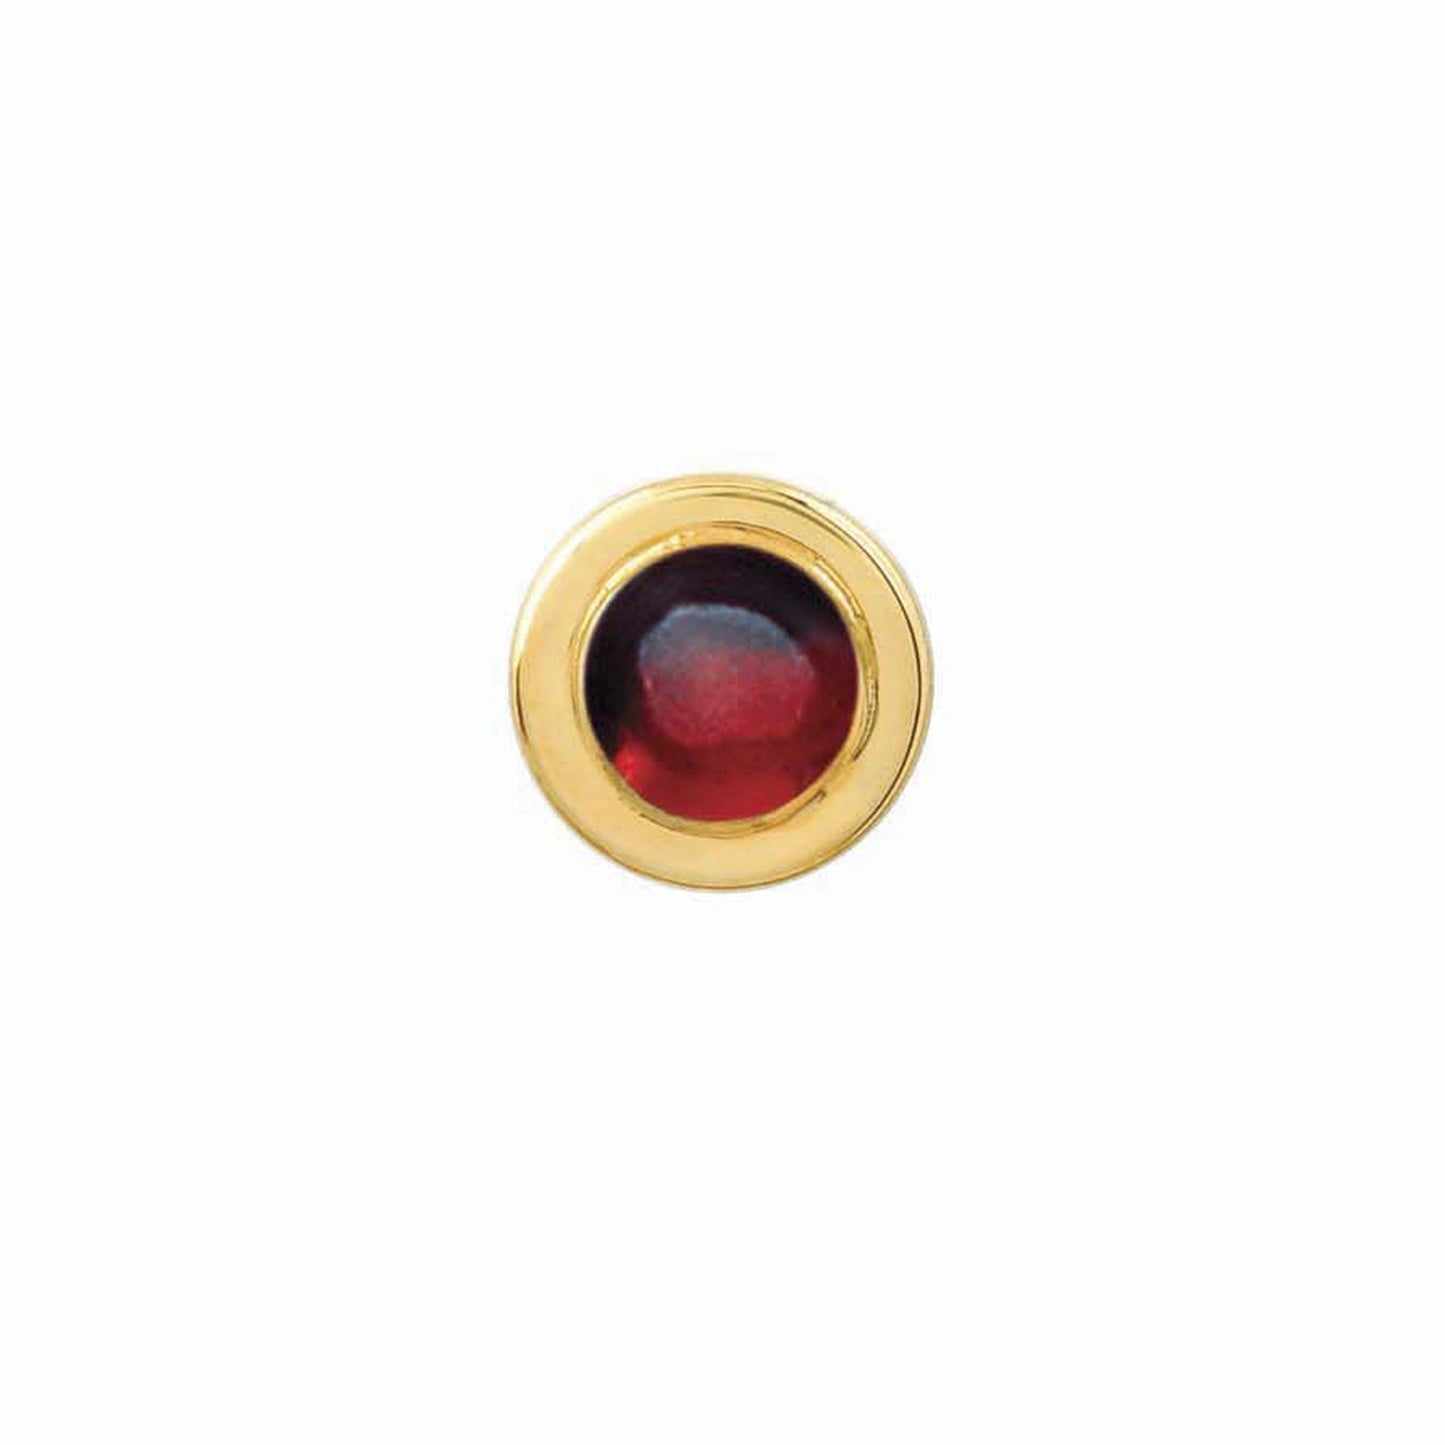 A 14k yellow gold tie tack with red garnet displayed on a neutral white background.